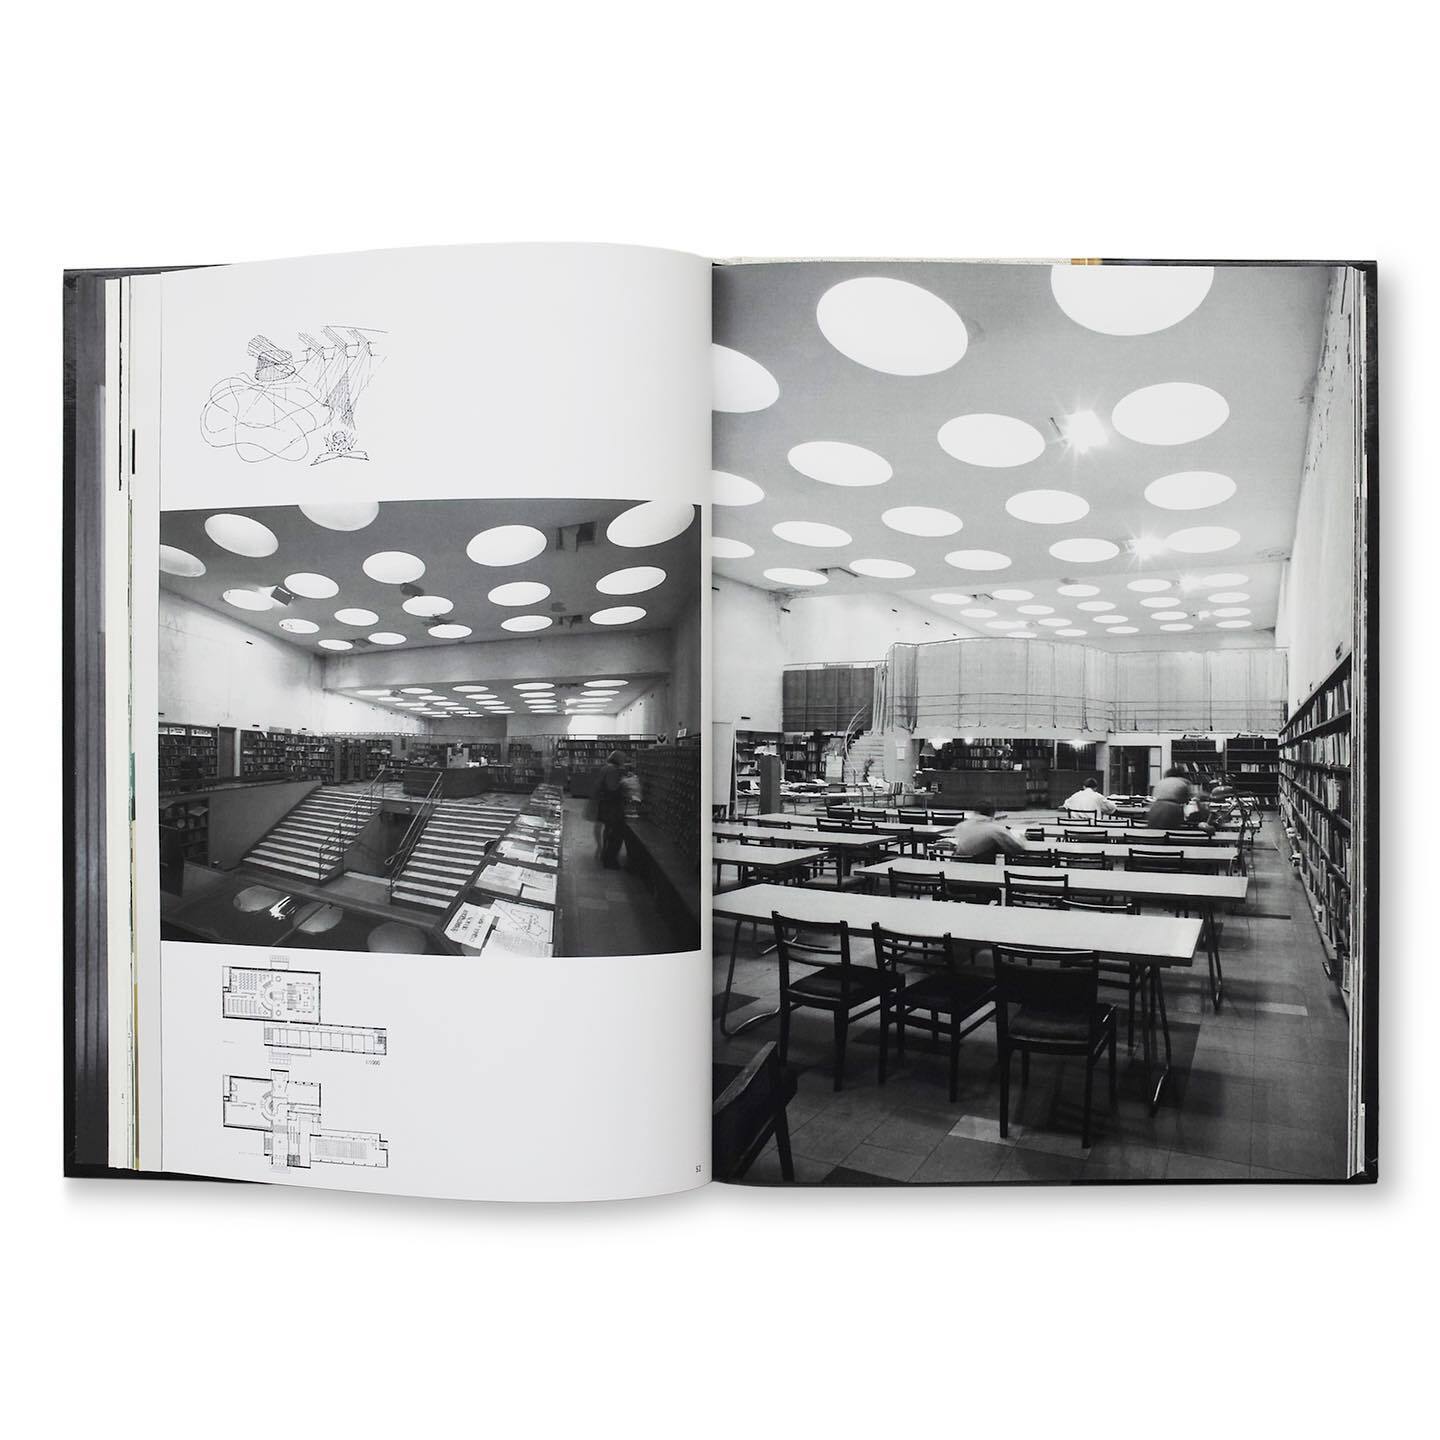 Alvar Aalto: A Gentler Structure for Life 取り寄せ | つばさ洋書